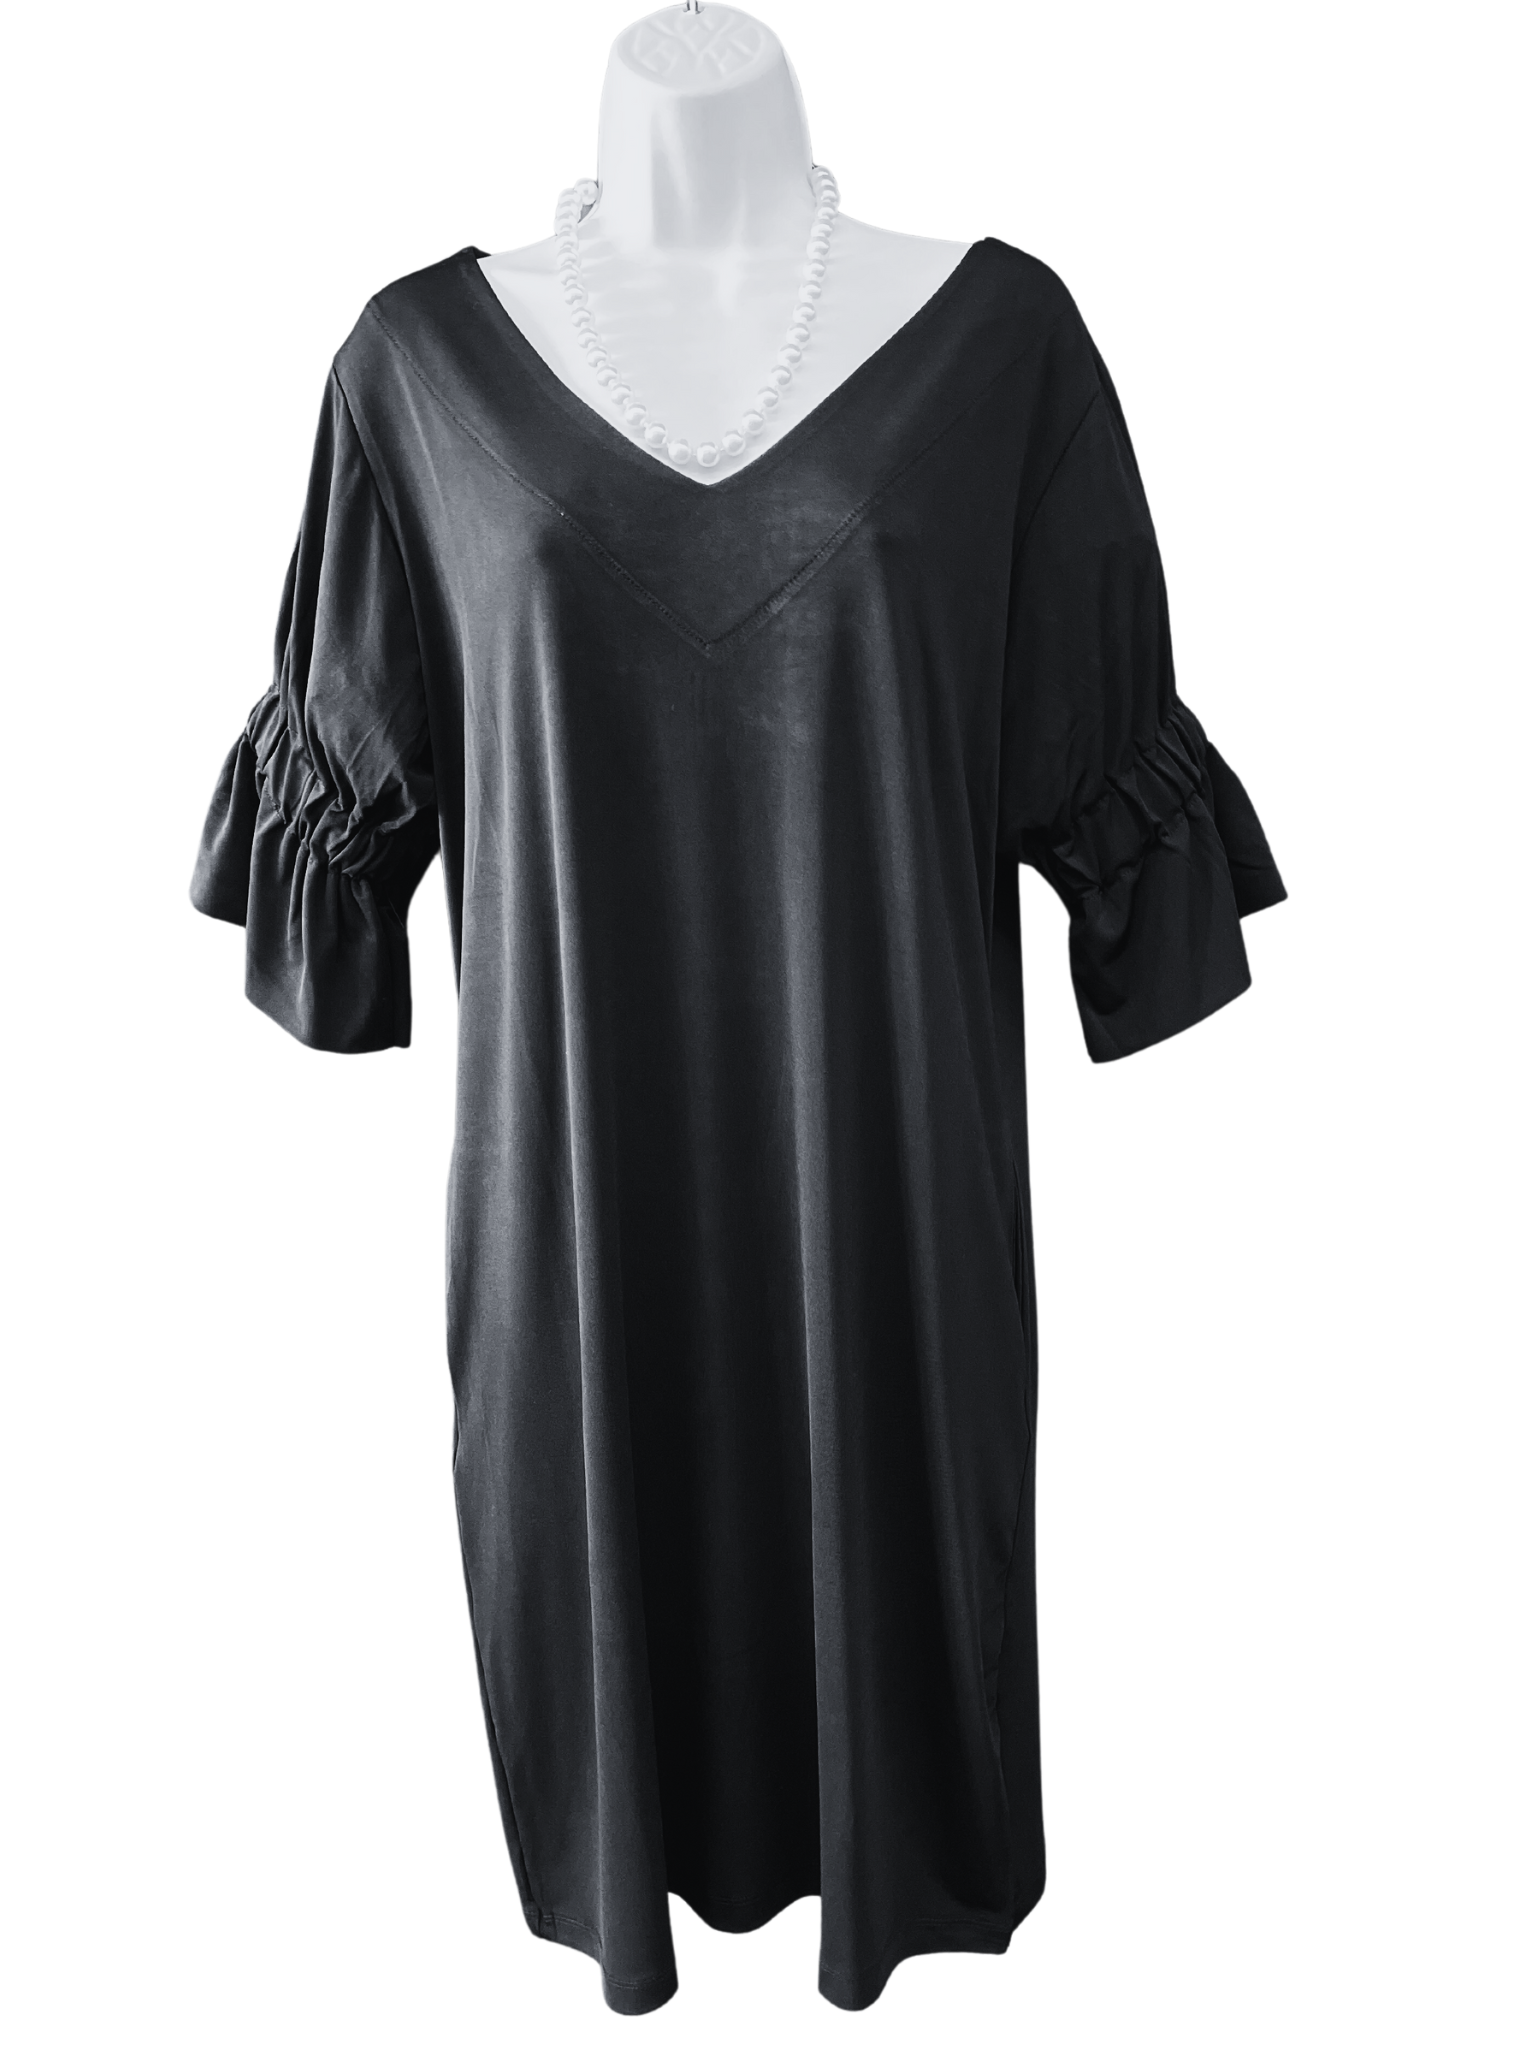 95% polyester 5% Spandex  This dress is a serious improvement on the ol' 'little black dress'--get a load of the sweet gathered sleeve that gives just the right amount of poof! Machine wash warm, gentle cycle. Hang to dry, or tumble dry low.